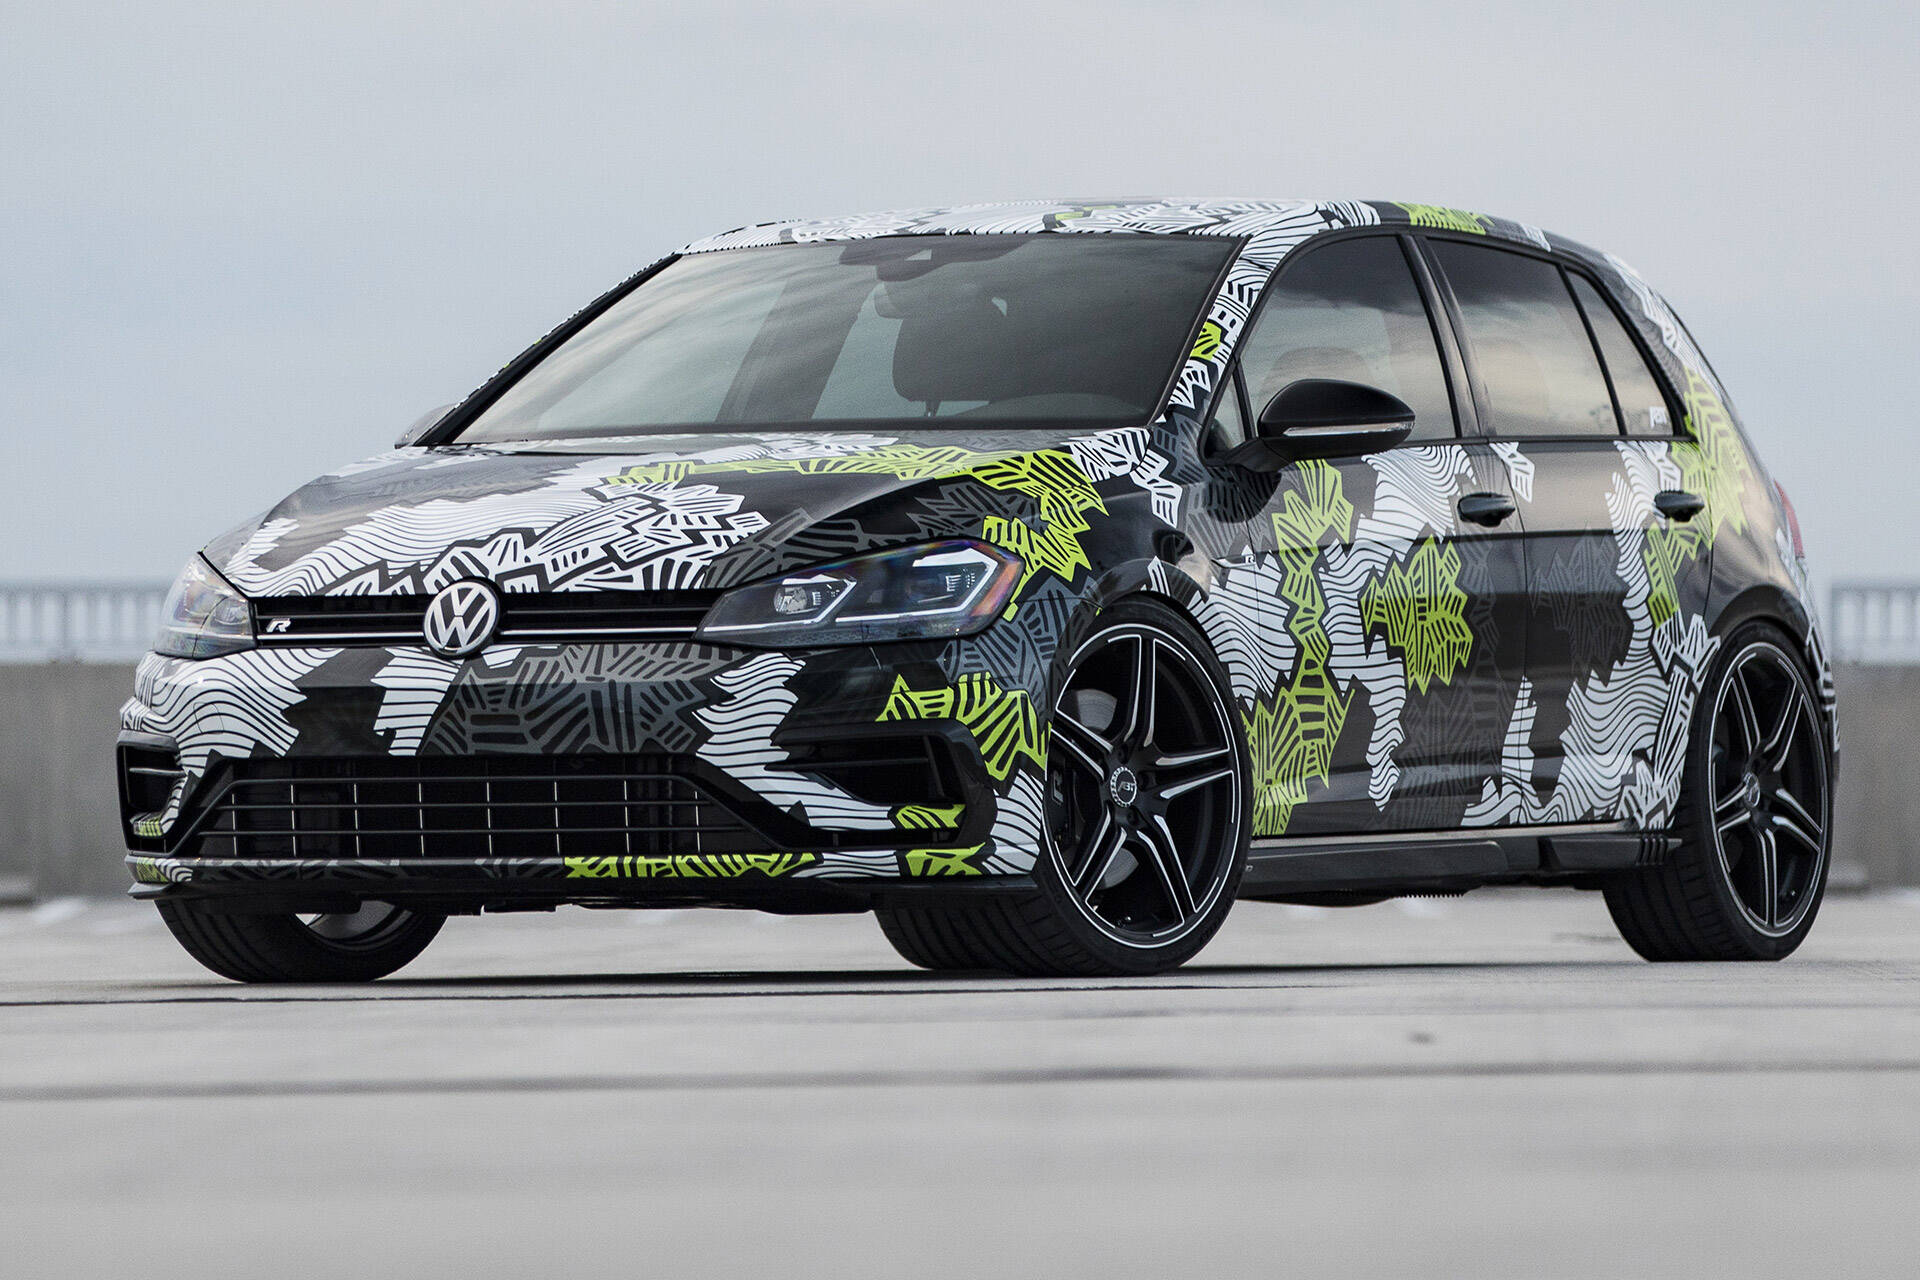 VW Golf R modified by ABT part of “2018 Volkswagen Enthusiast Vehicle  Fleet” - Audi Tuning, VW Tuning, Chiptuning von ABT Sportsline.